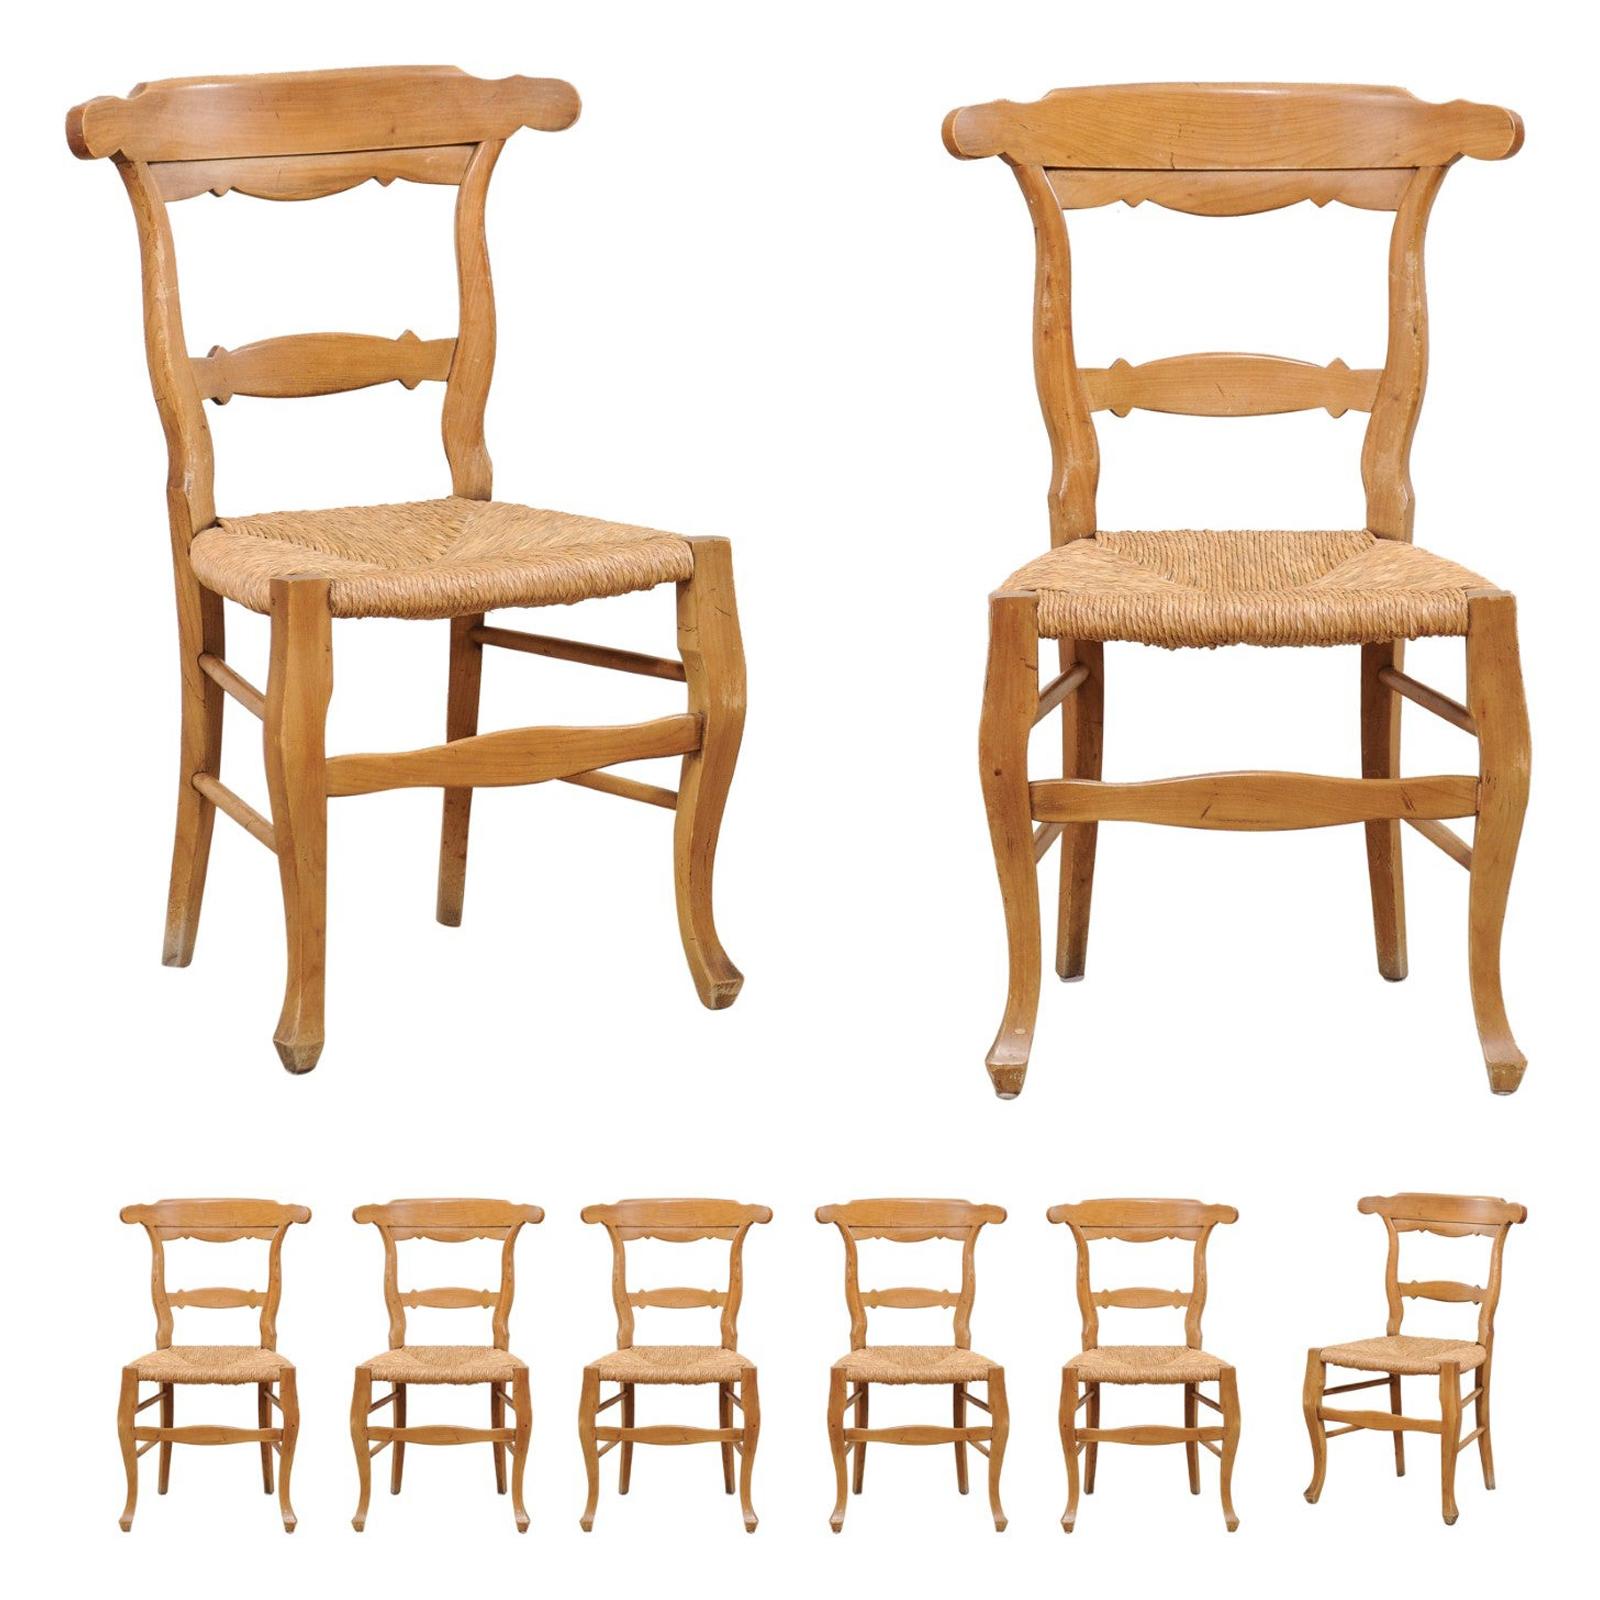 French Set of 8 Side Chairs with Hand-Woven Rush Seats, Early to Mid 20th C